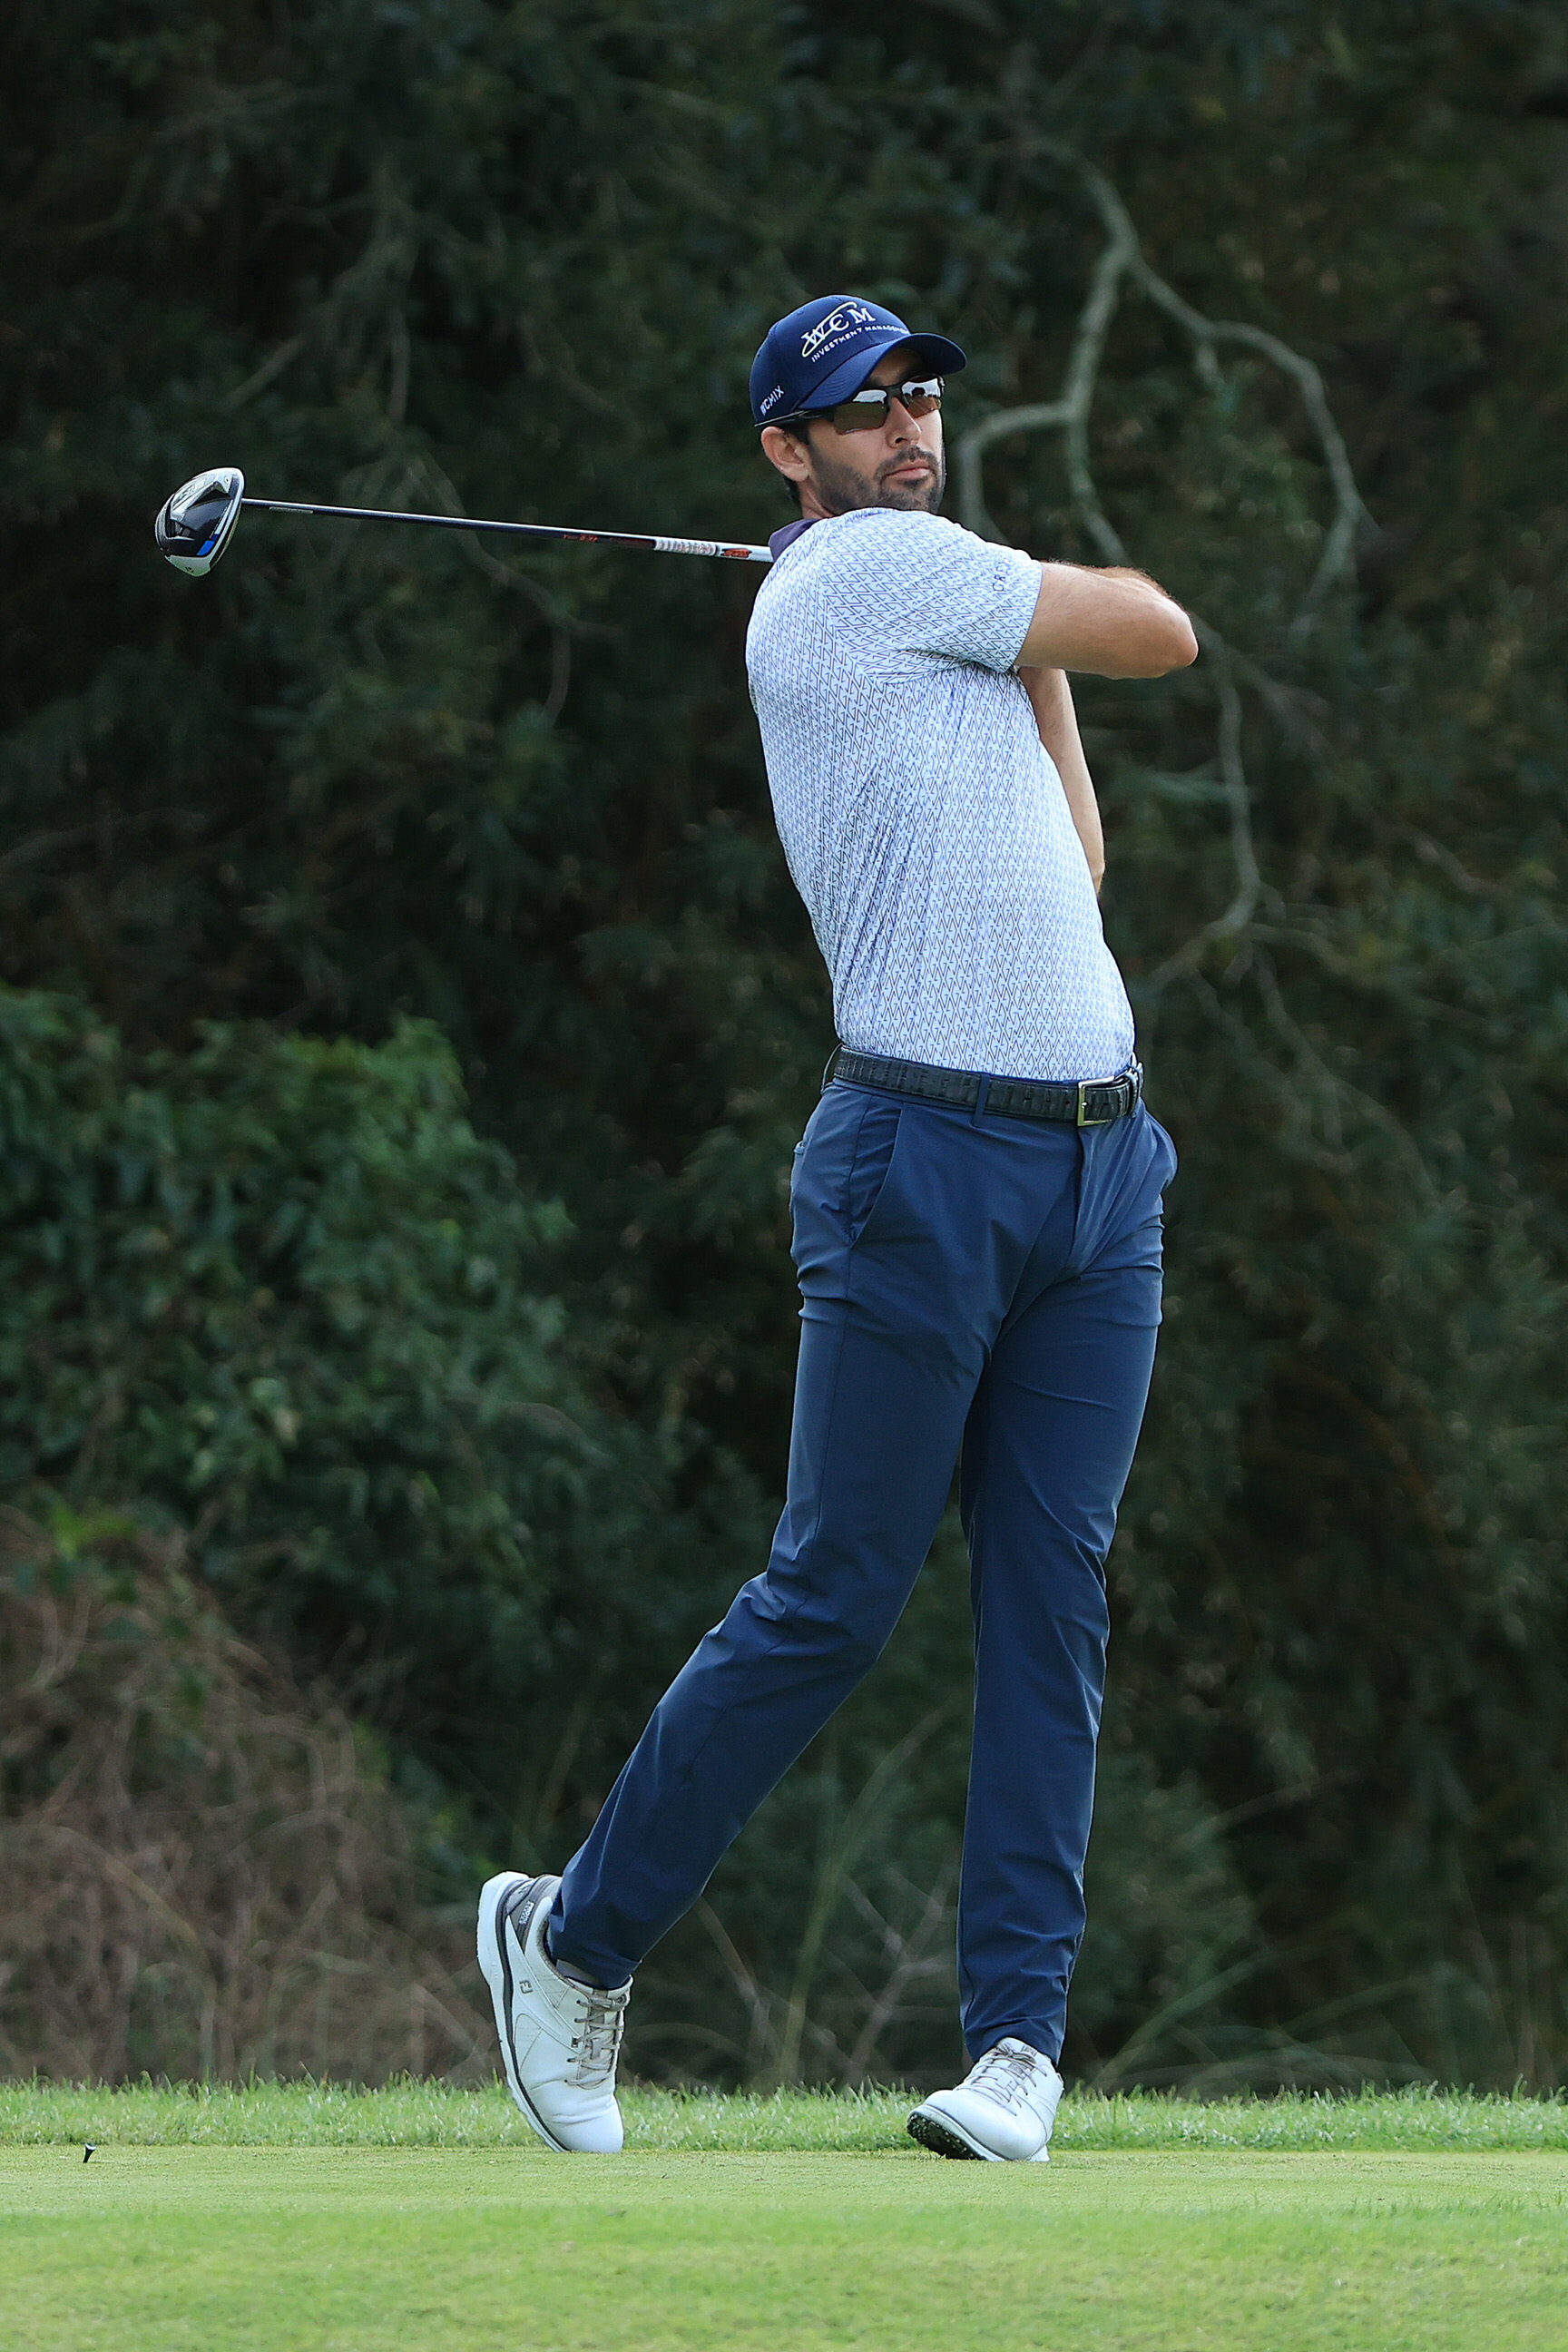  ST SIMONS ISLAND, GEORGIA - NOVEMBER 22: Cameron Tringale of the United States \ during the final round of The RSM Classic at the Seaside Course at Sea Island Golf Club on November 22, 2020 in St Simons Island, Georgia. (Photo by Sam Greenwood/Getty